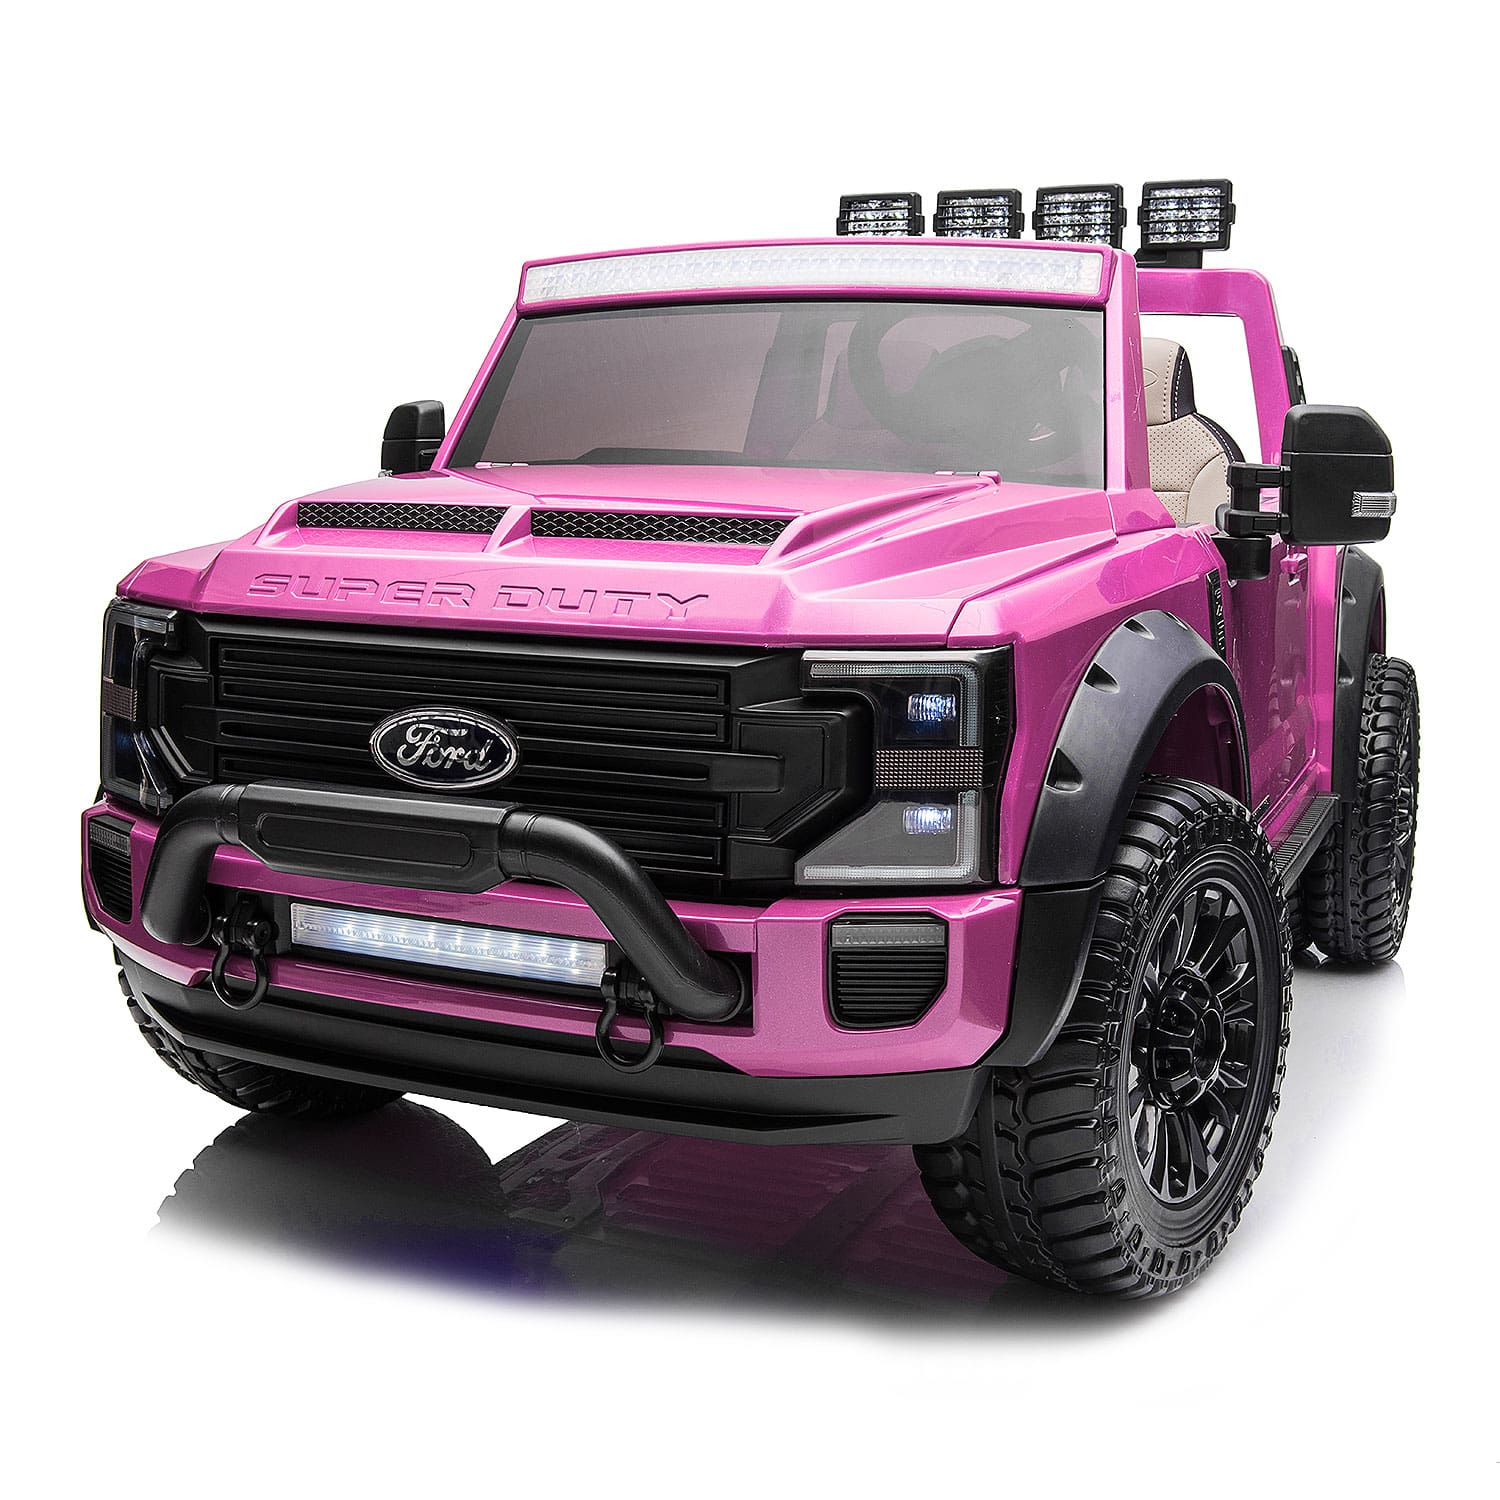 Ford Super Duty Electric Toy Car - Pink